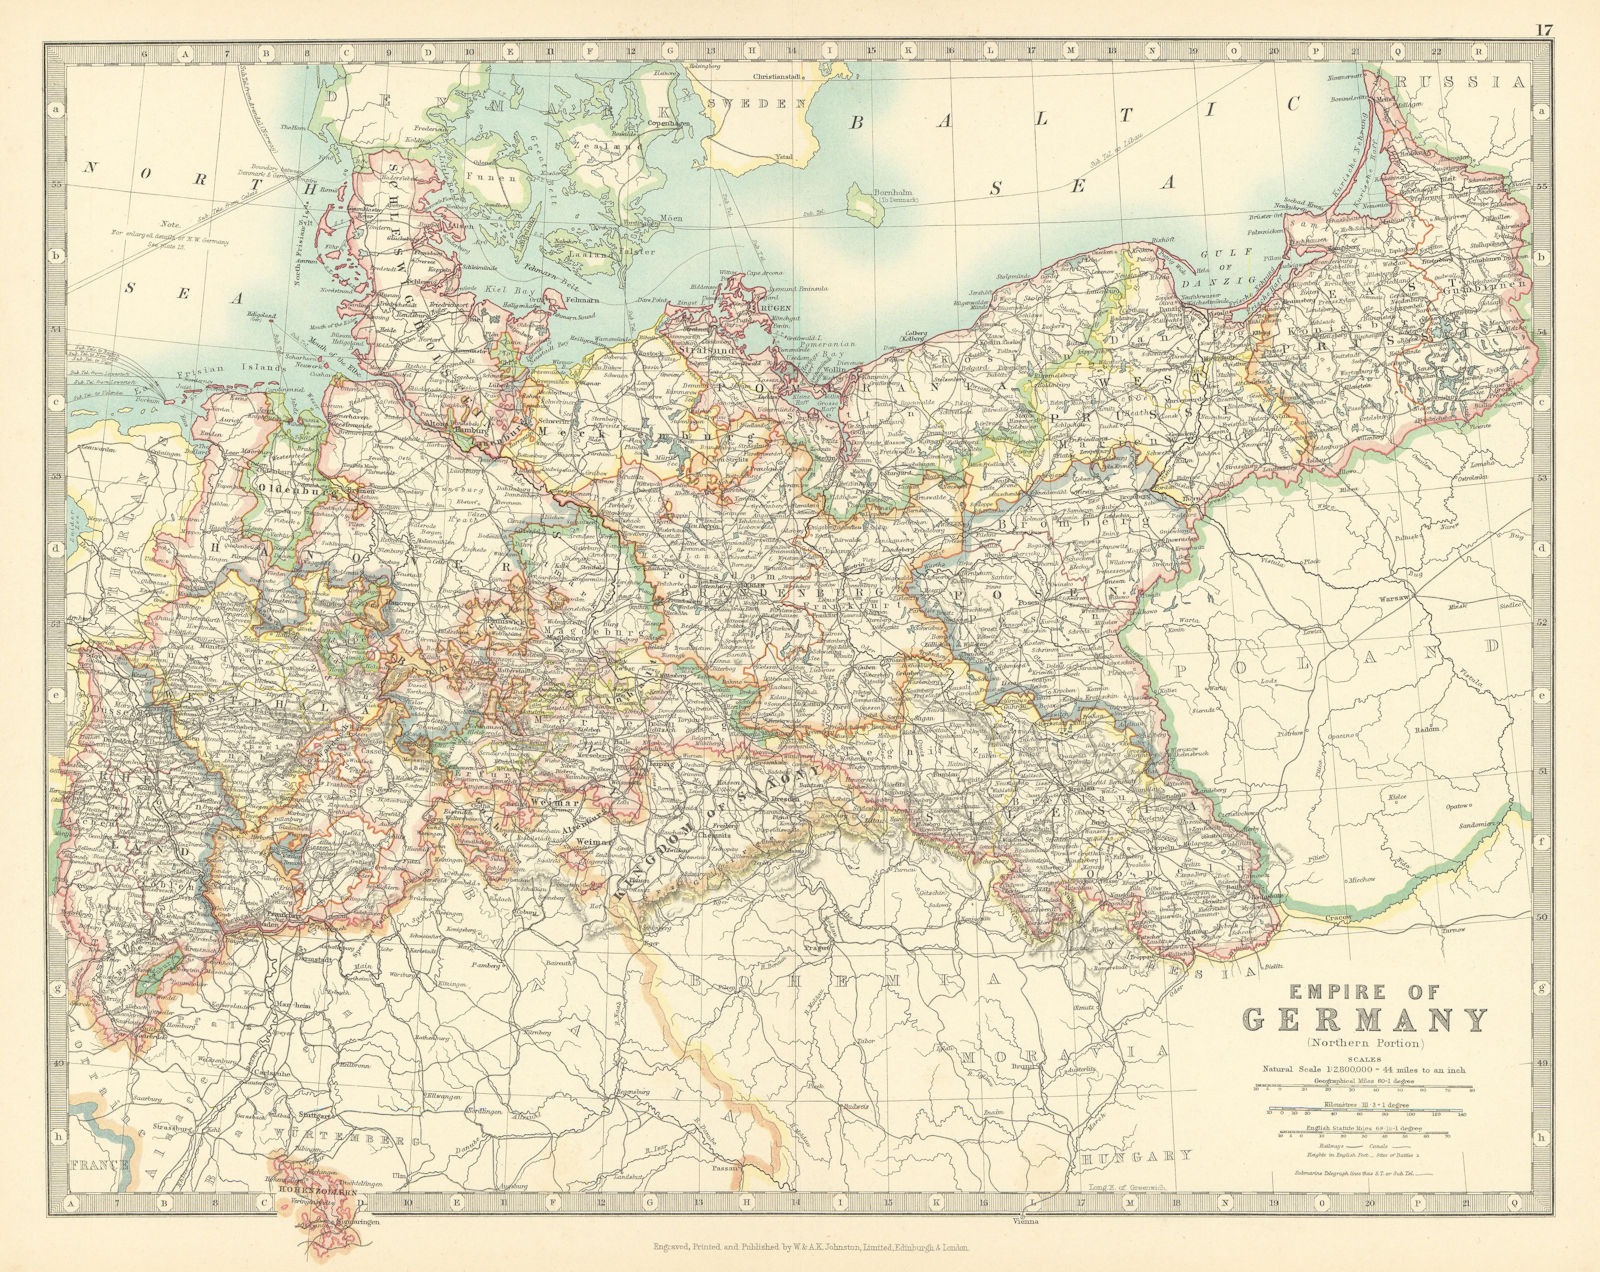 GERMAN EMPIRE NORTH showing important battlefield & dates. JOHNSTON 1911 map